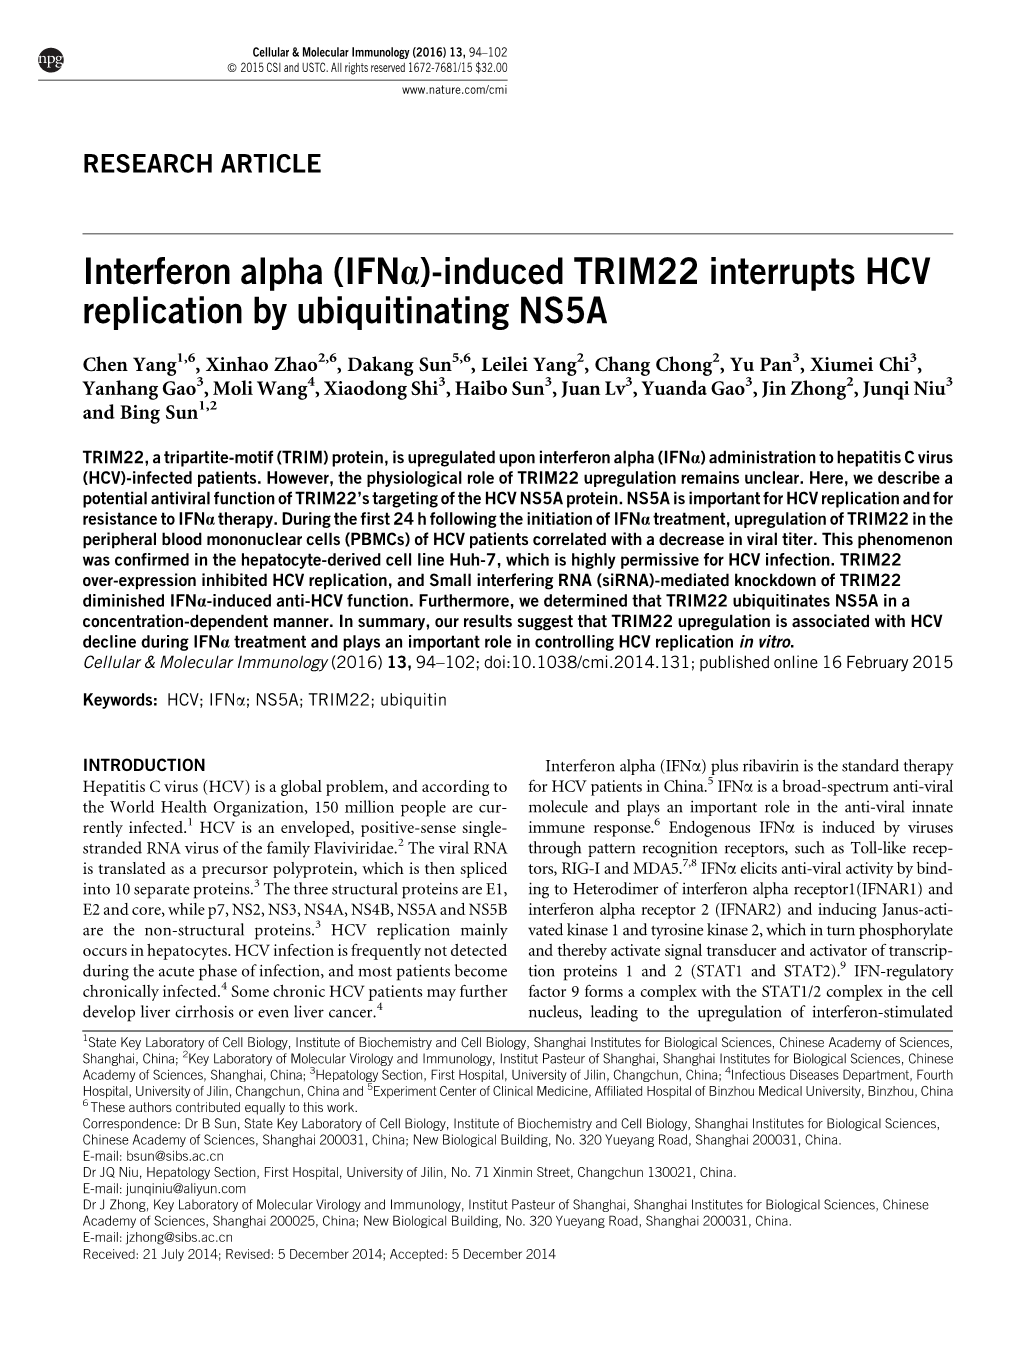 Induced TRIM22 Interrupts HCV Replication by Ubiquitinating NS5A